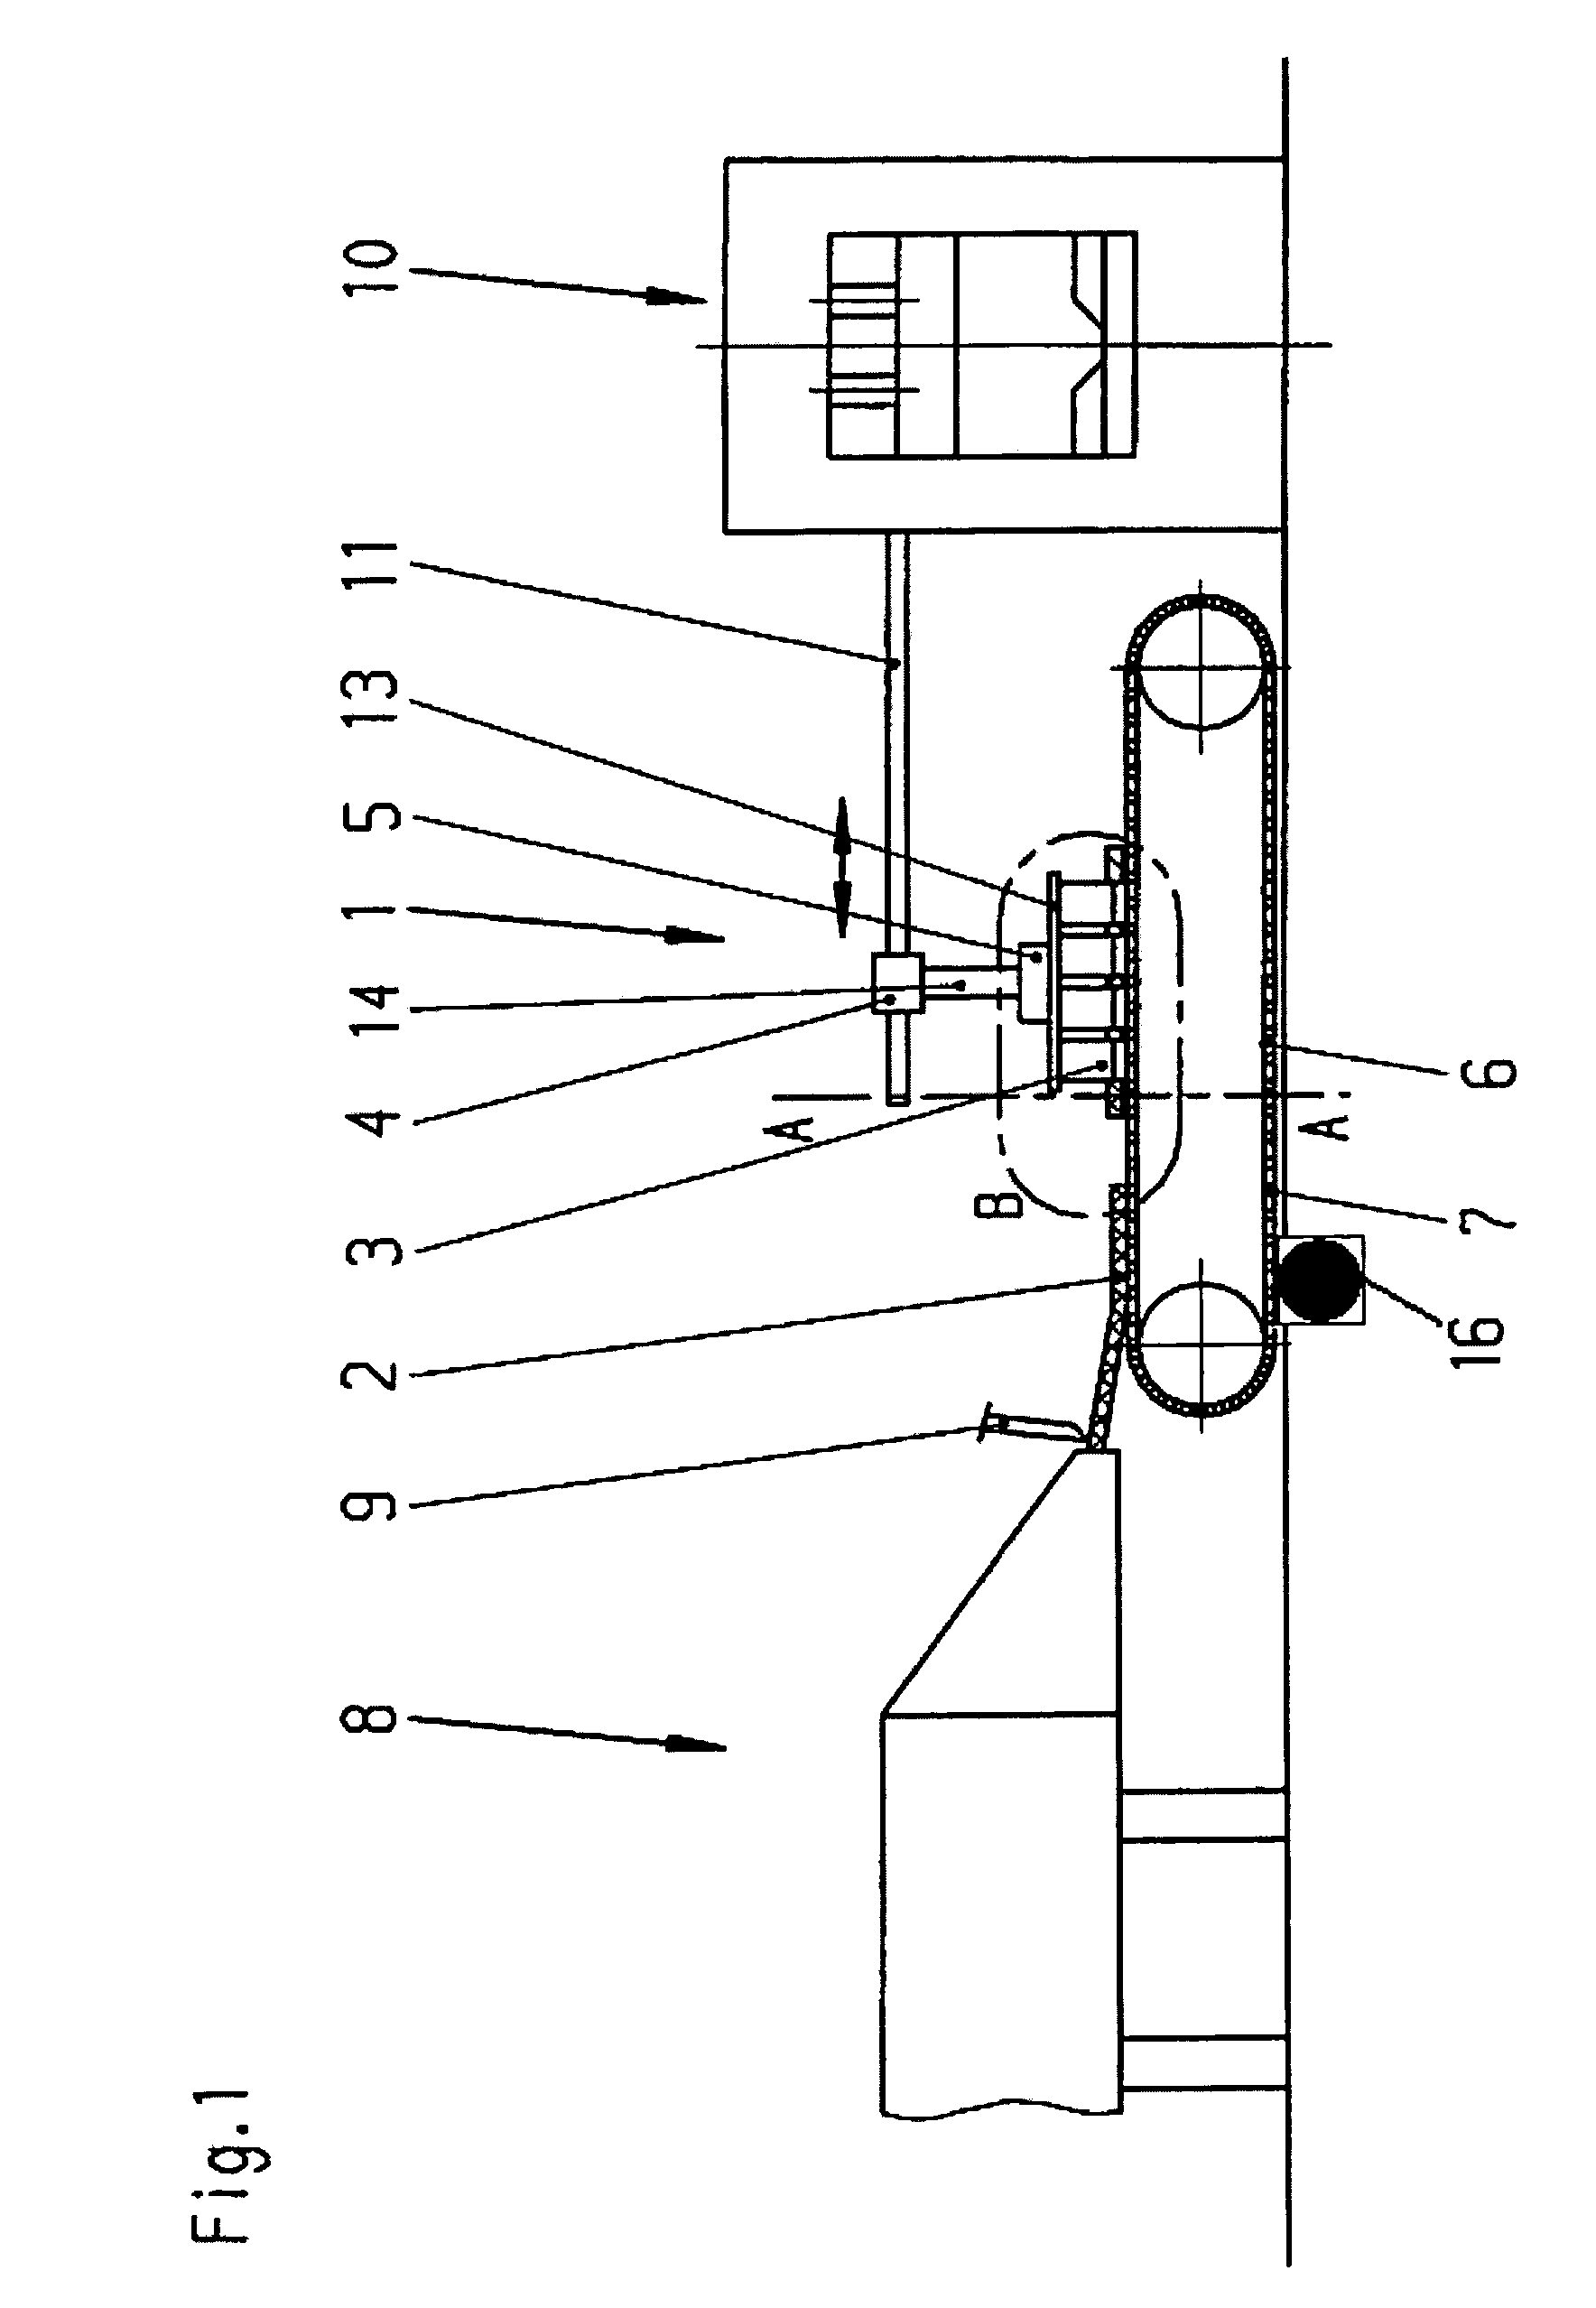 Method and apparatus for picking up a plastic product